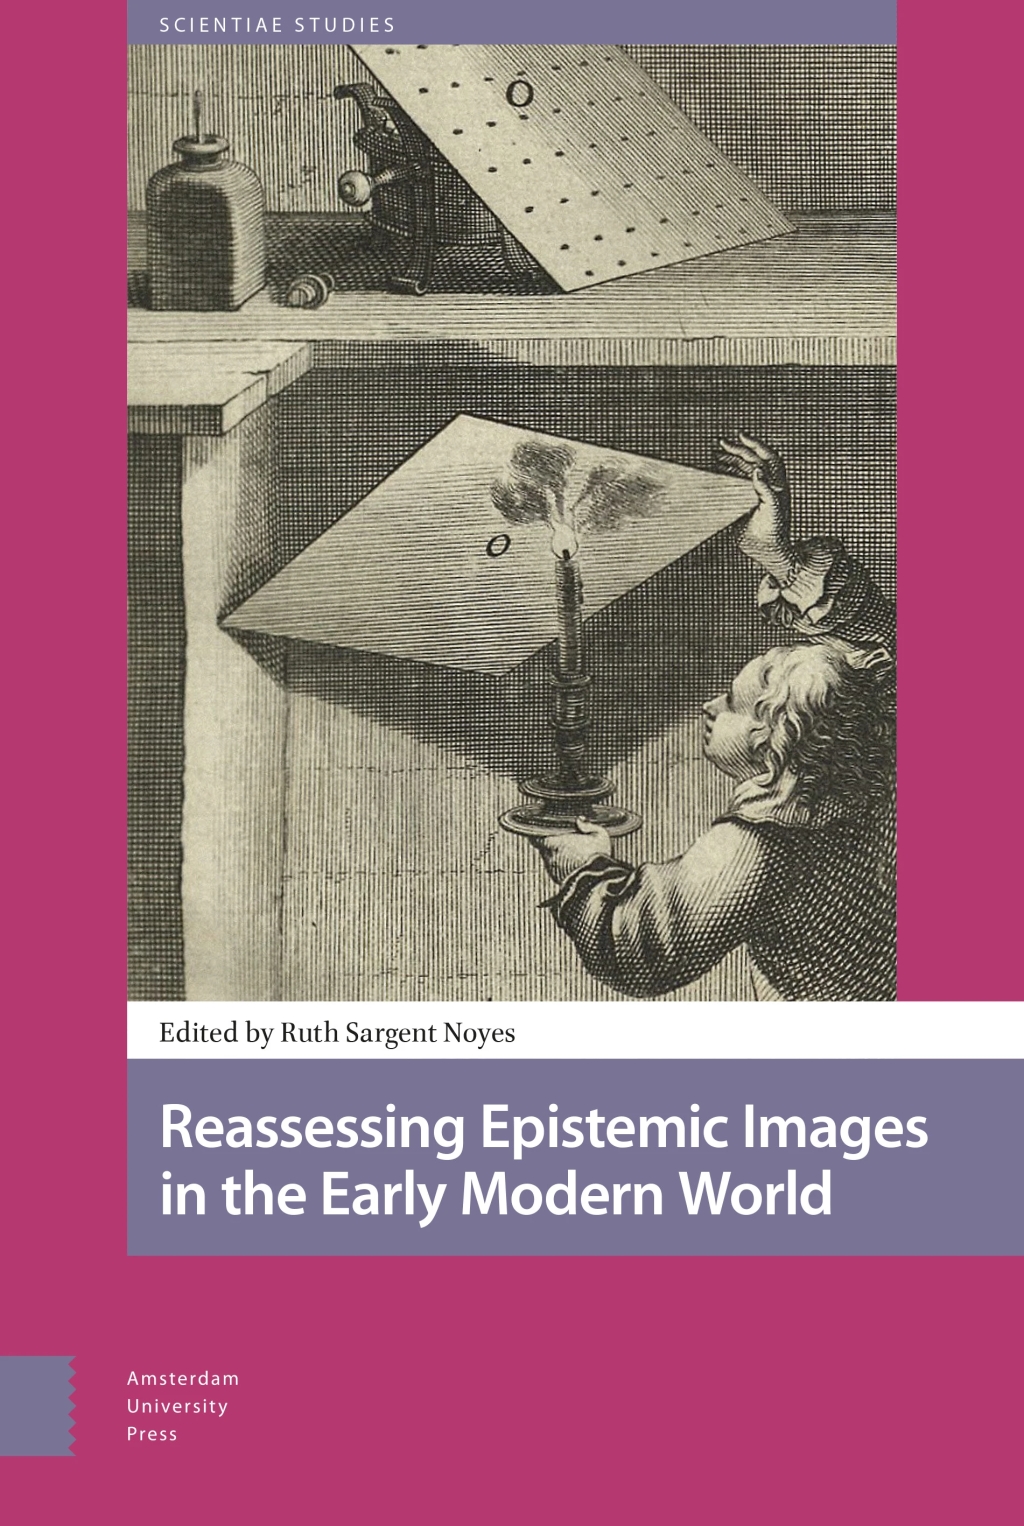 Ruth Noyes (ed.) Reassessing Epistemic Images in the Early Modern World